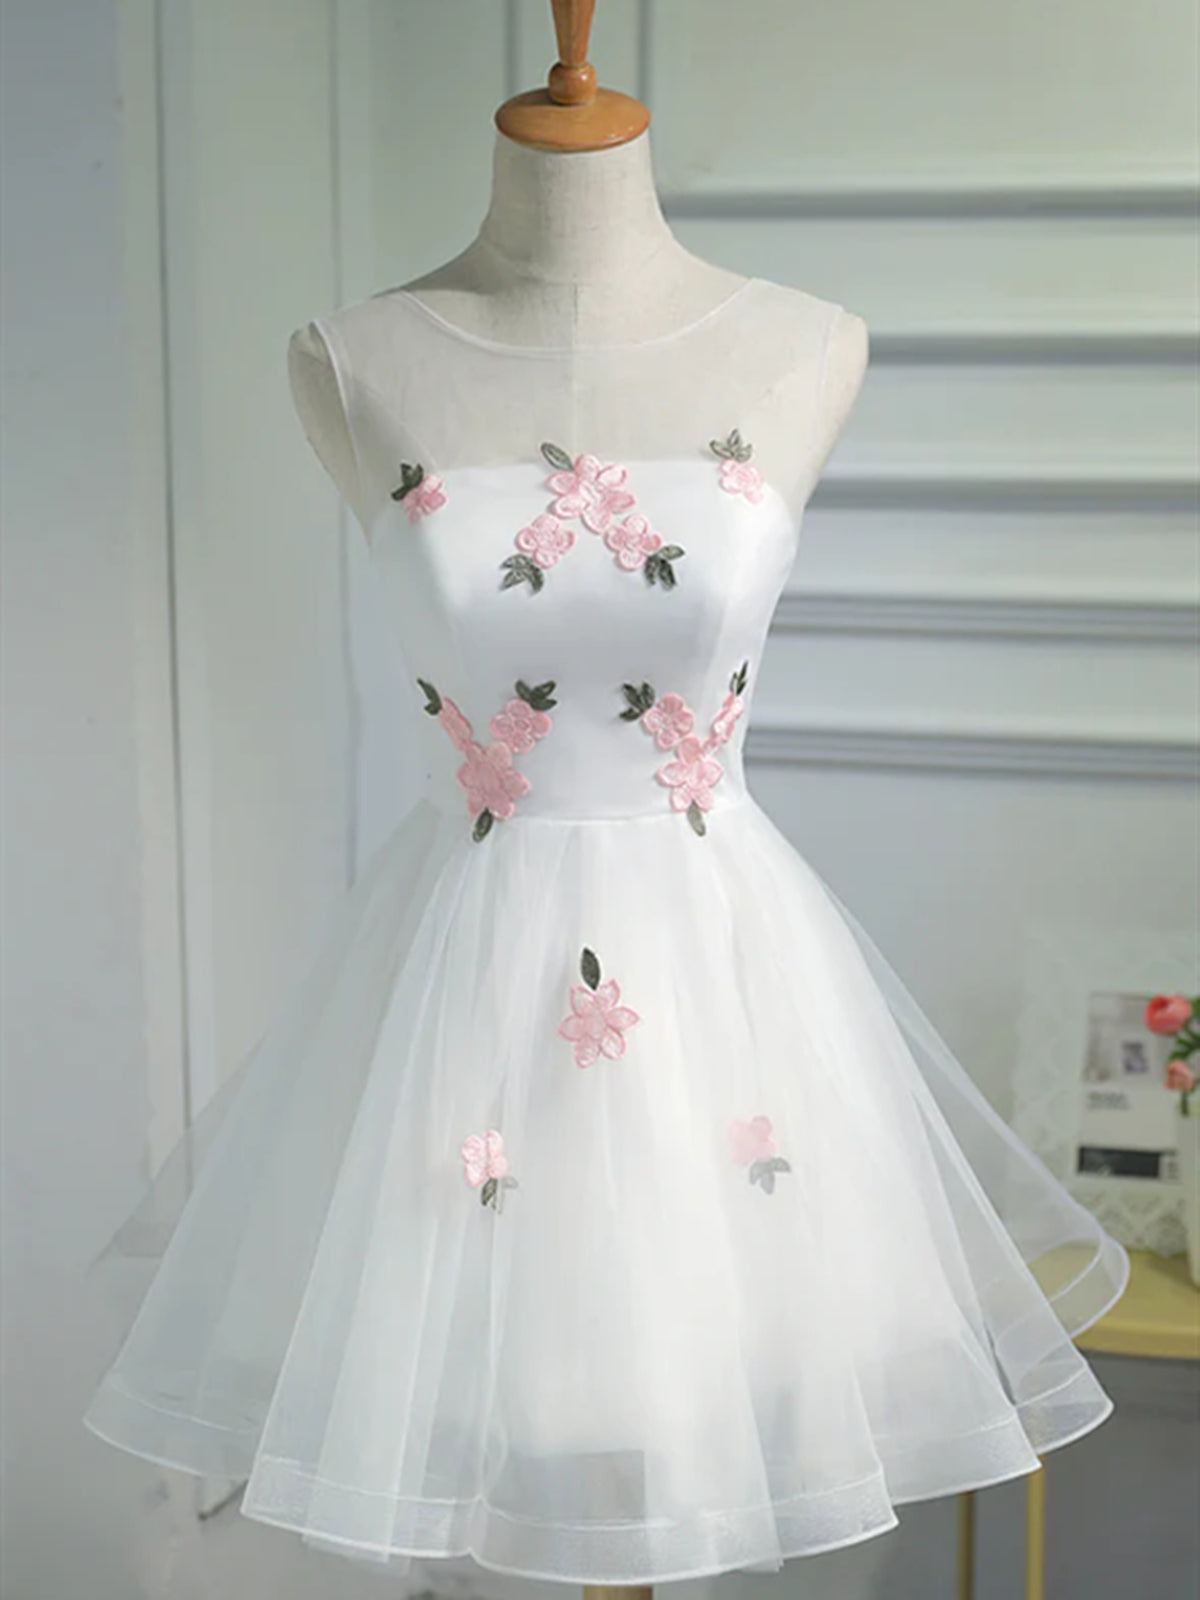 Short White Floral Corset Prom Dresses, Short White Floral Corset Formal Corset Homecoming Dresses outfit, Party Dresses Long Sleeve